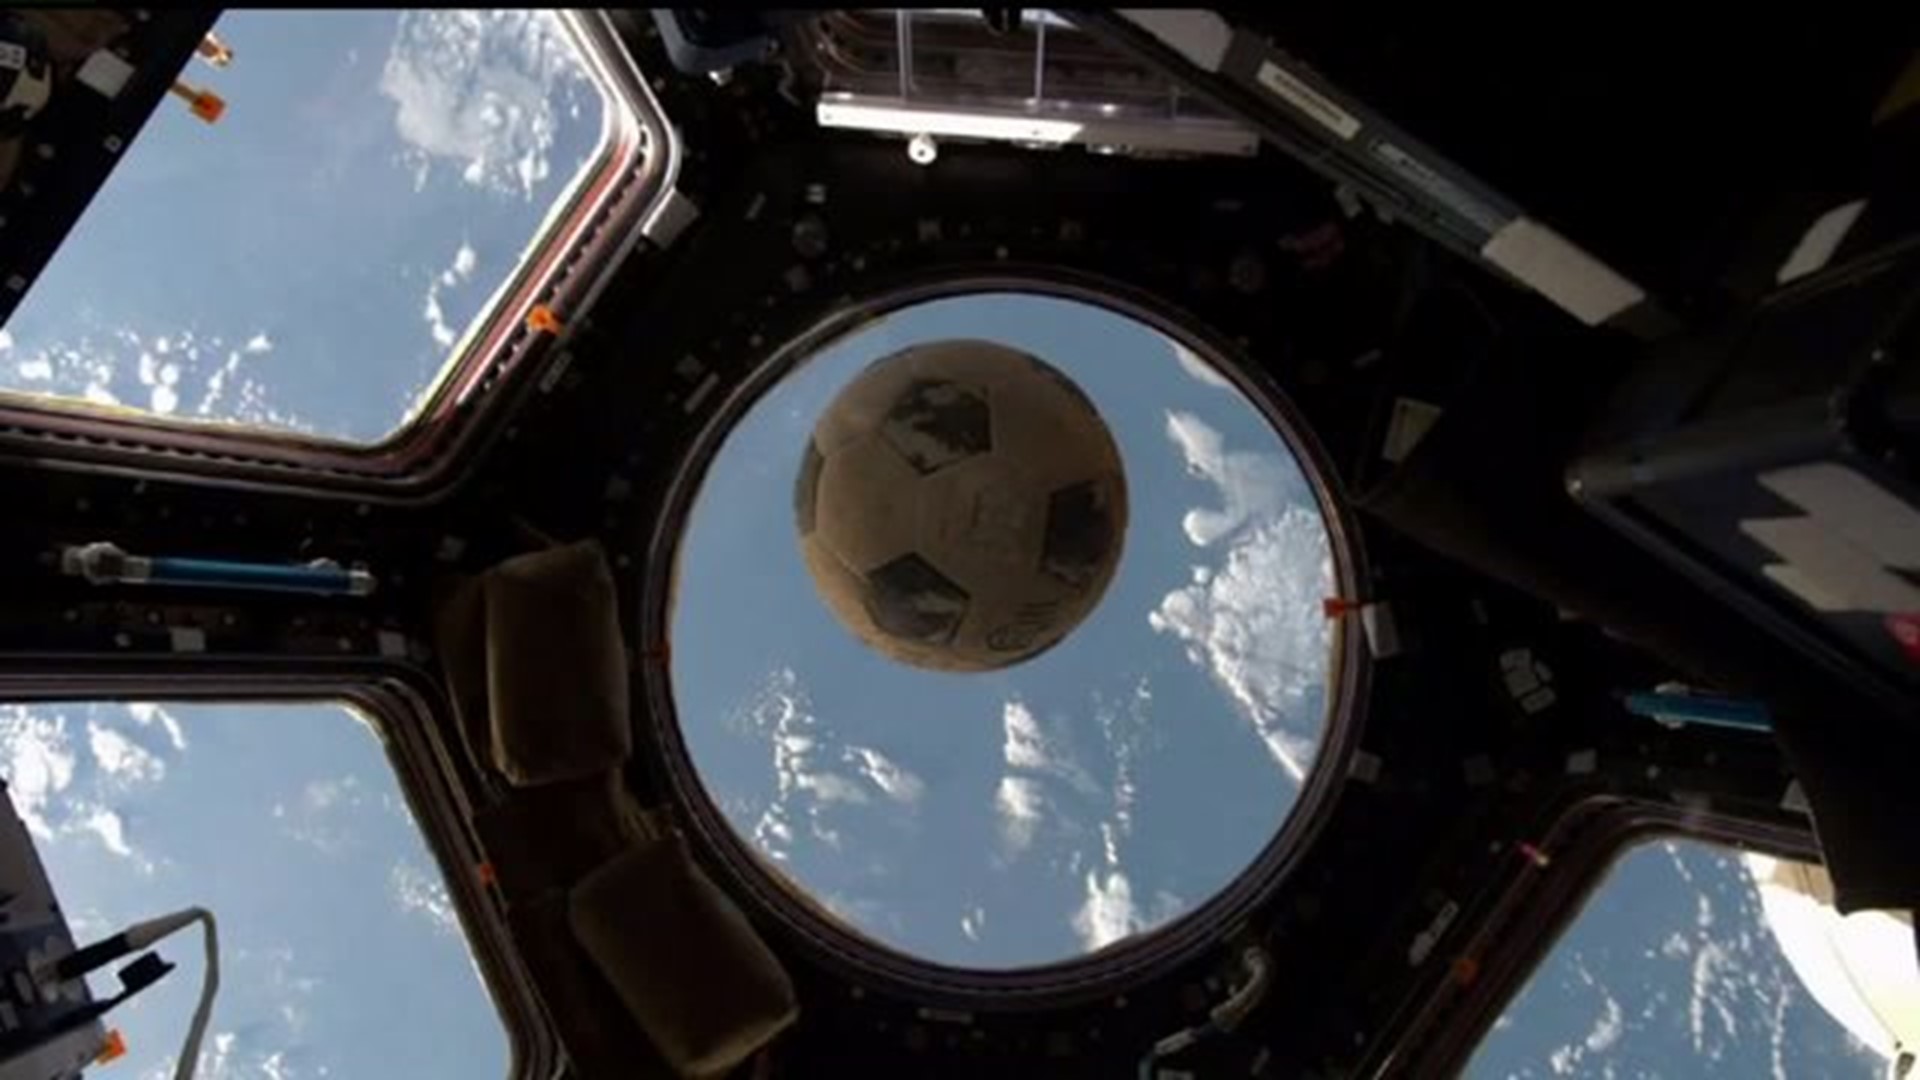 Soccer ball in space